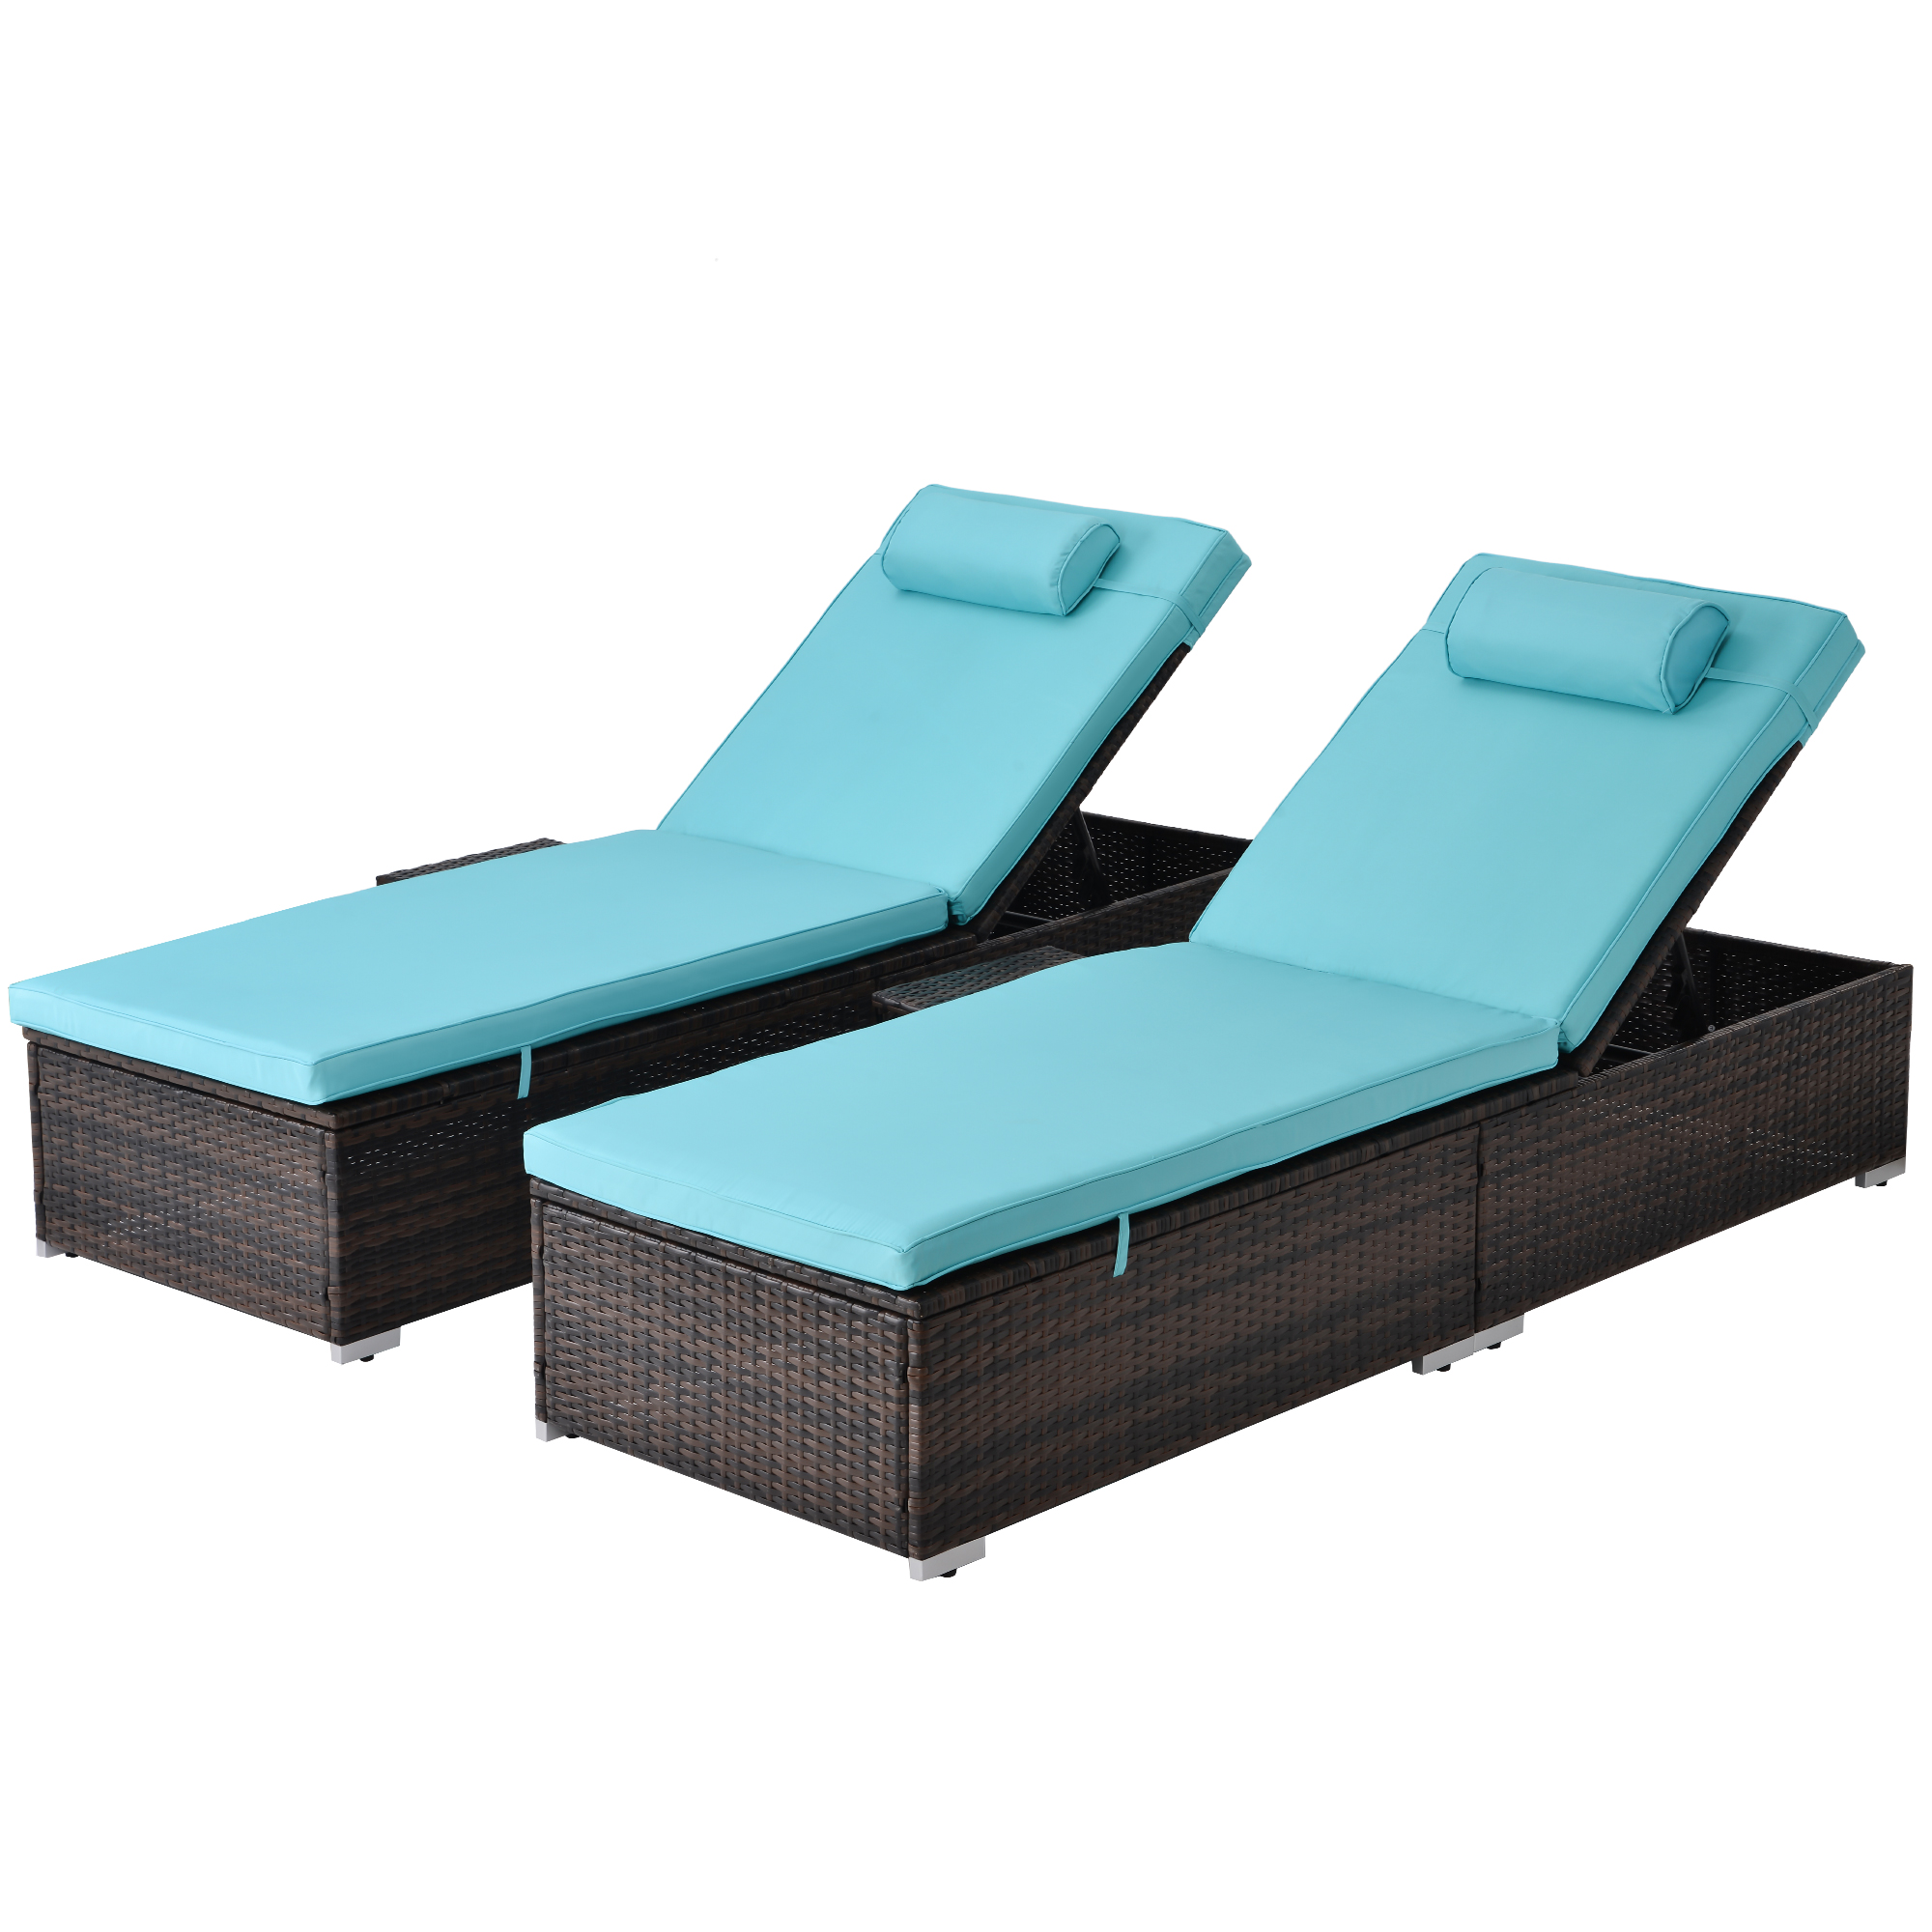 Outdoor PE Wicker Chaise Lounge, 2 Piece Patio Brown Rattan Reclining Chair Furniture Set, Beach Pool Adjustable Backrest Recliners with Side Table and Comfort Head Pillow, Brown - image 2 of 7